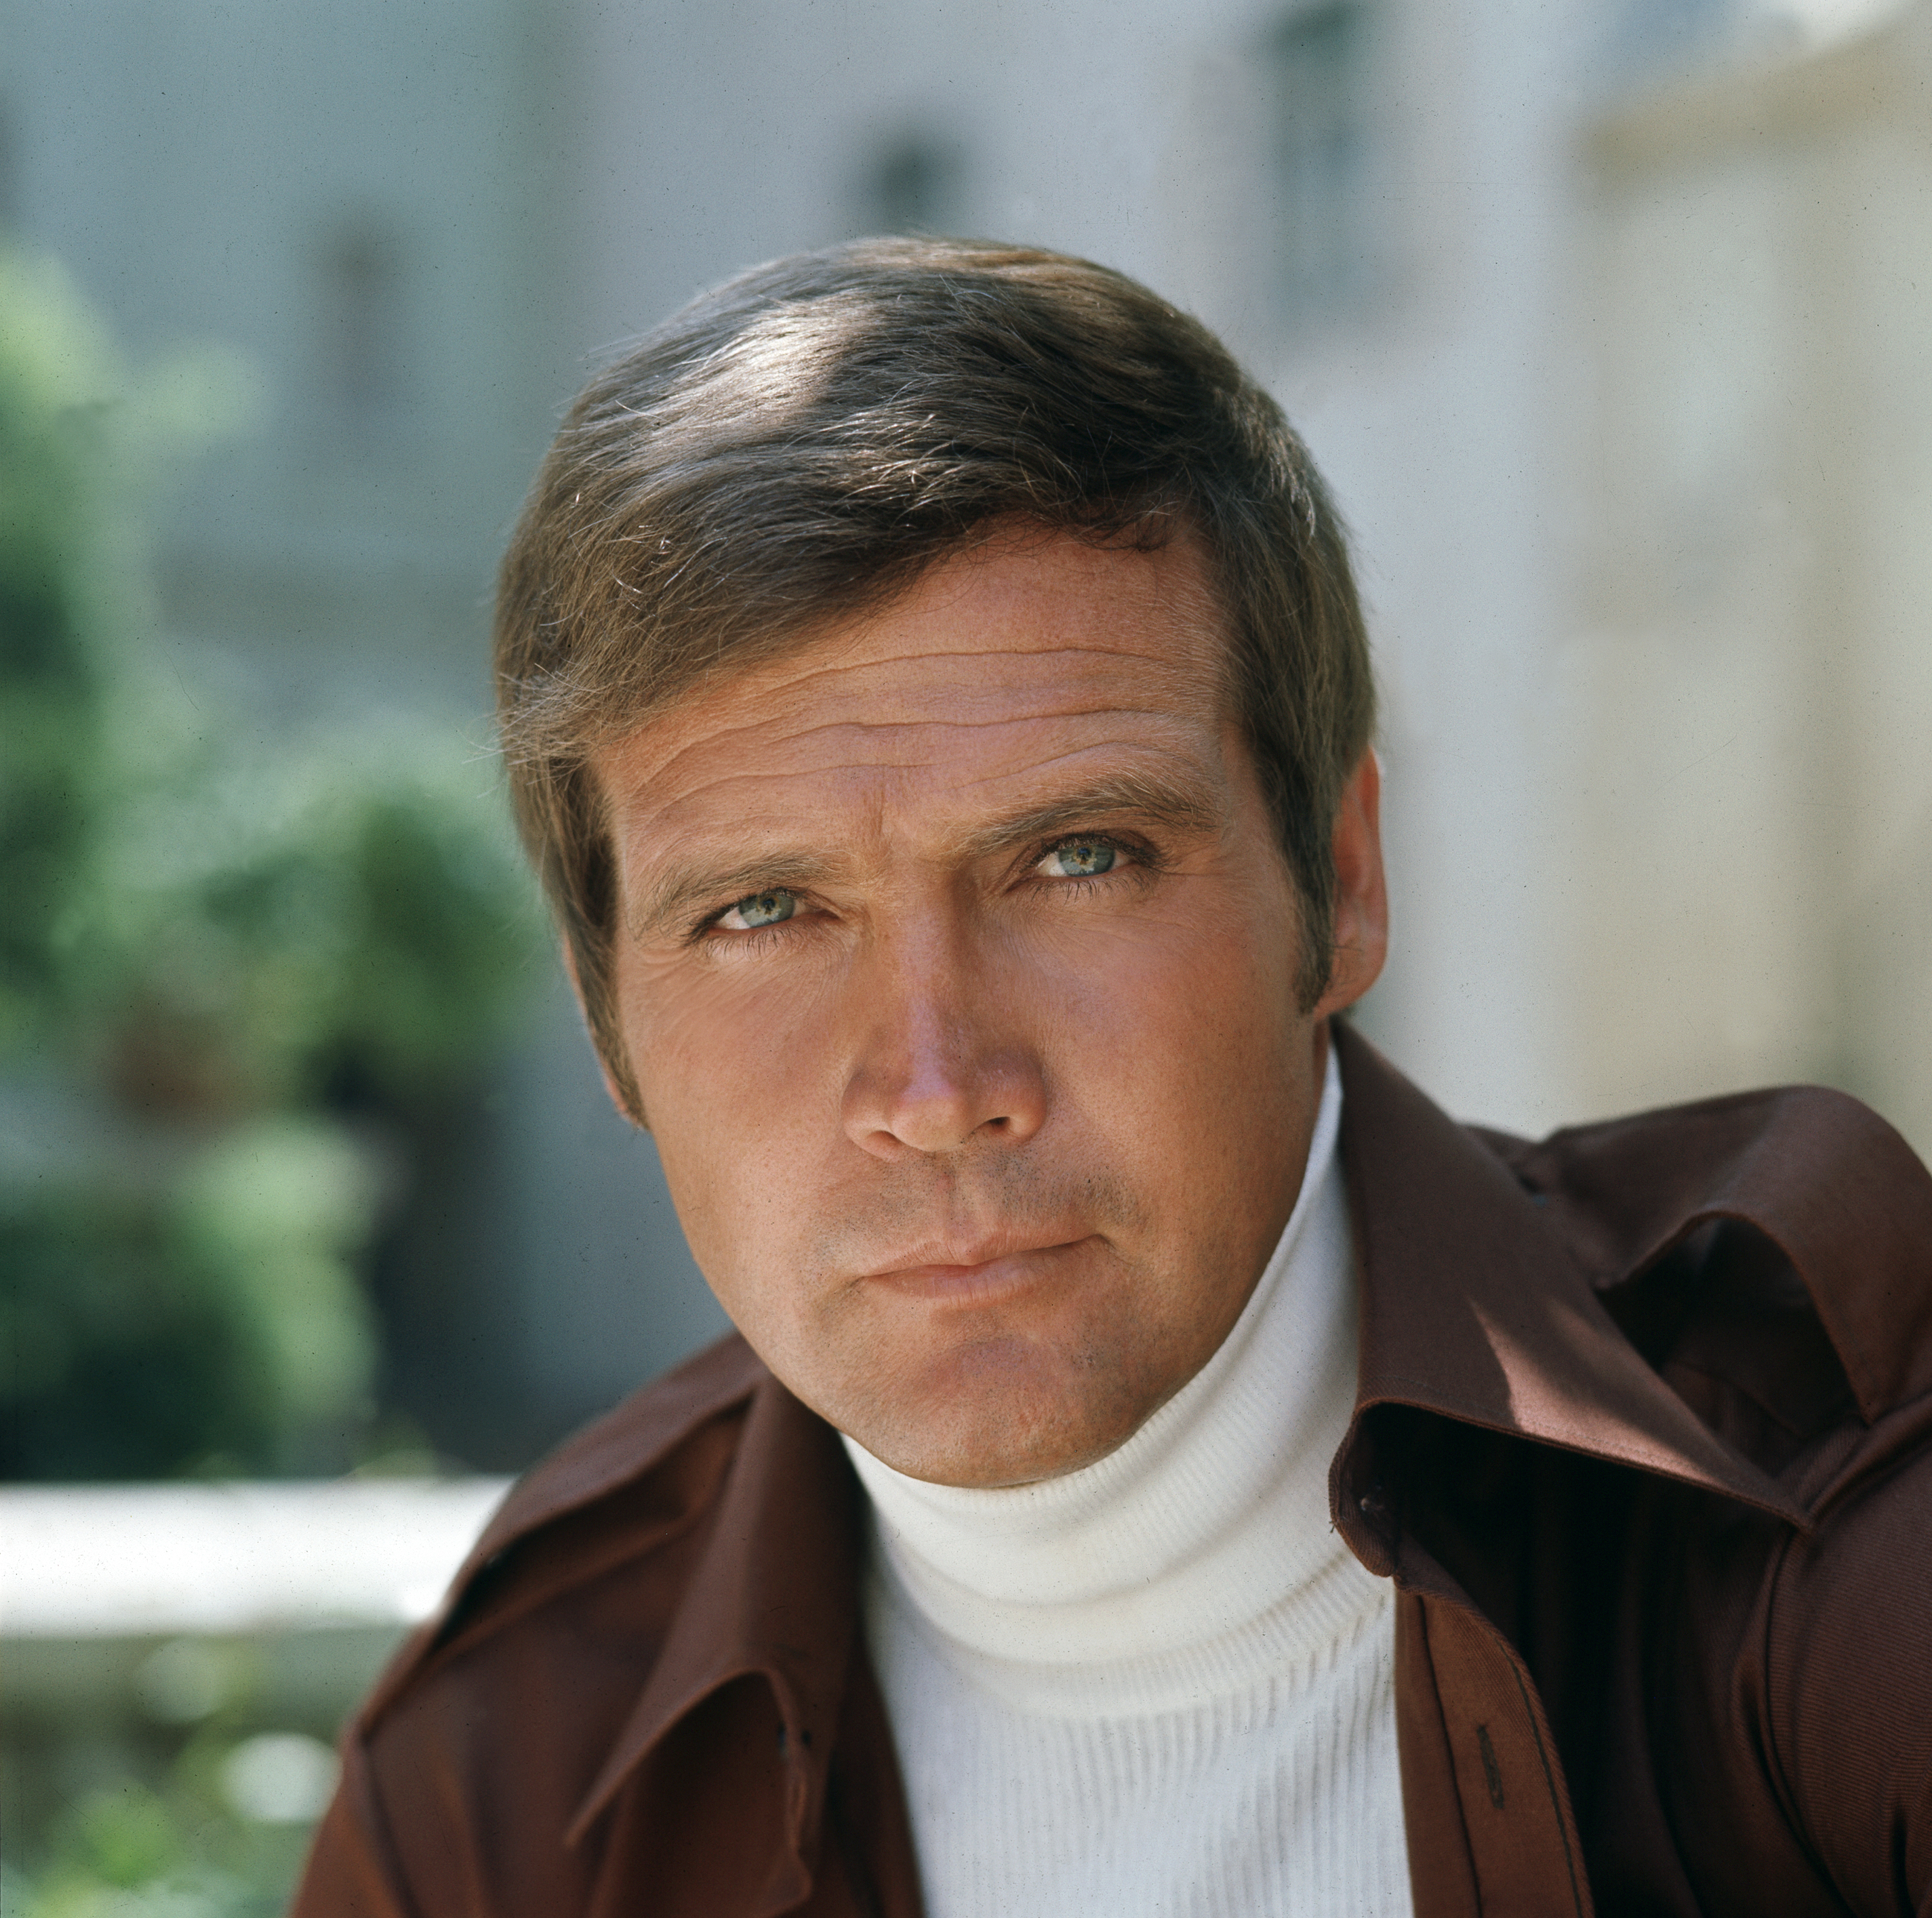 Lee Majors in "The Six Million Dollar Man" in October 1973 | Source: Getty Images